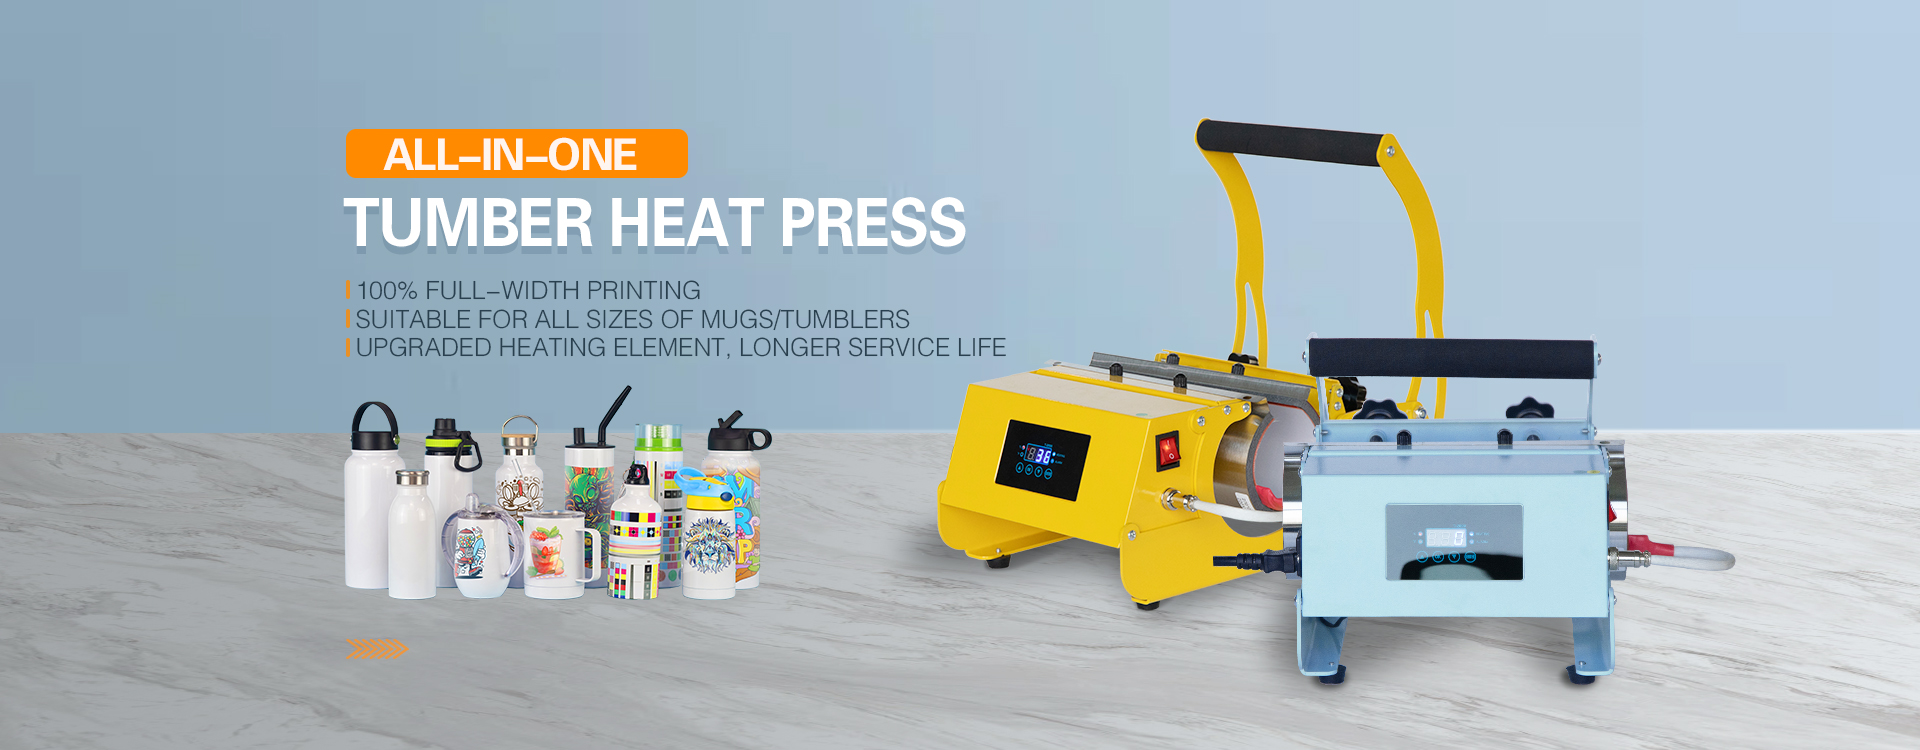 Wholesale Heat Press Nation Manufacturer and Supplier, Factory